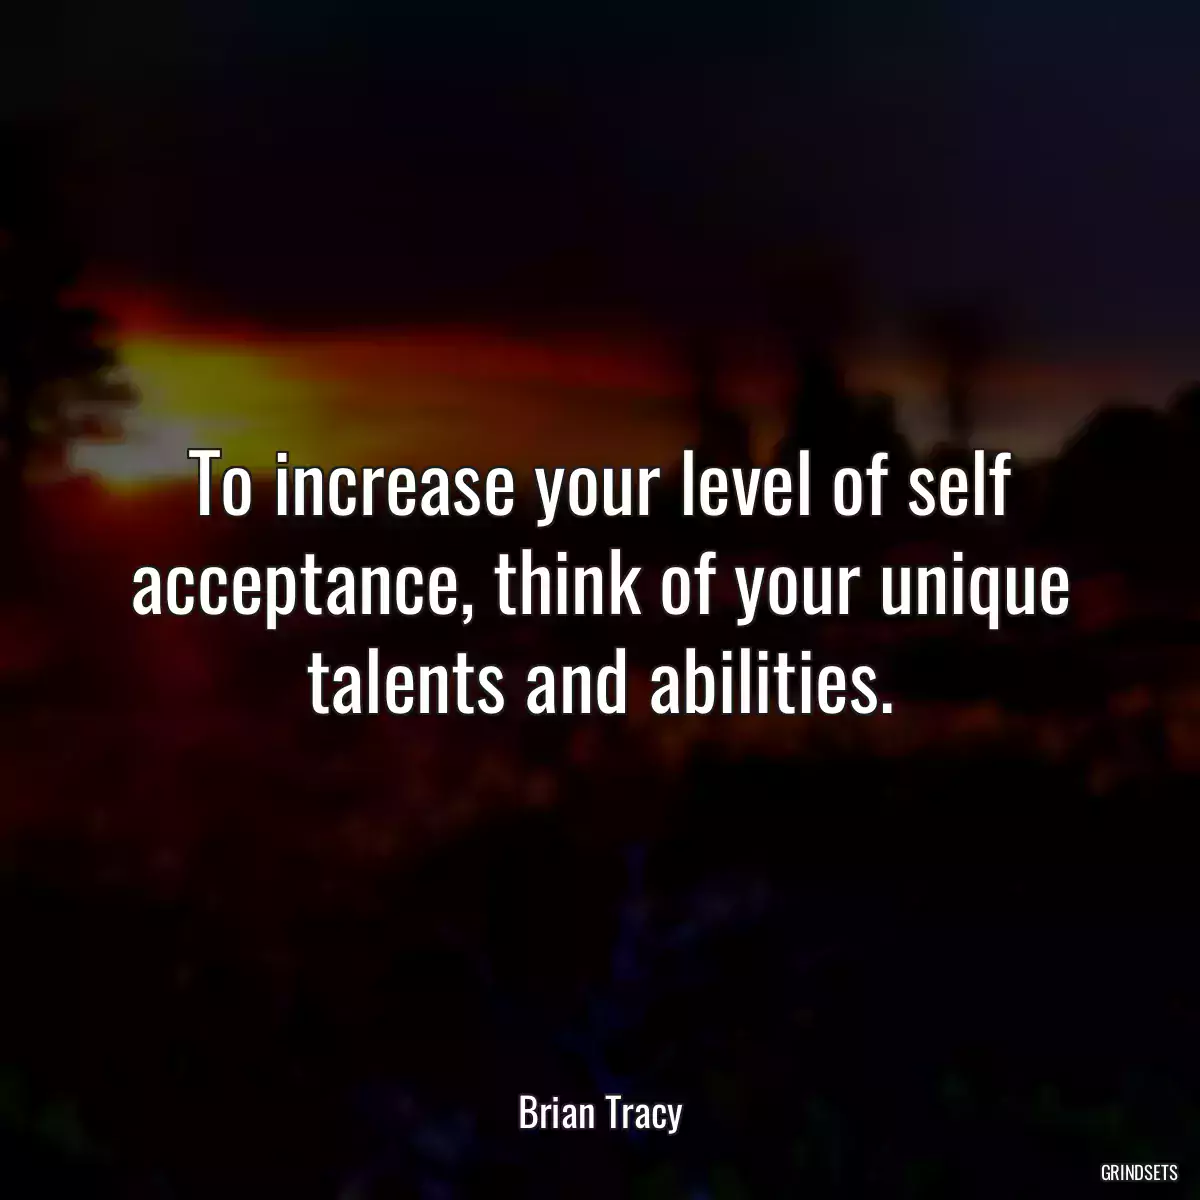 To increase your level of self acceptance, think of your unique talents and abilities.